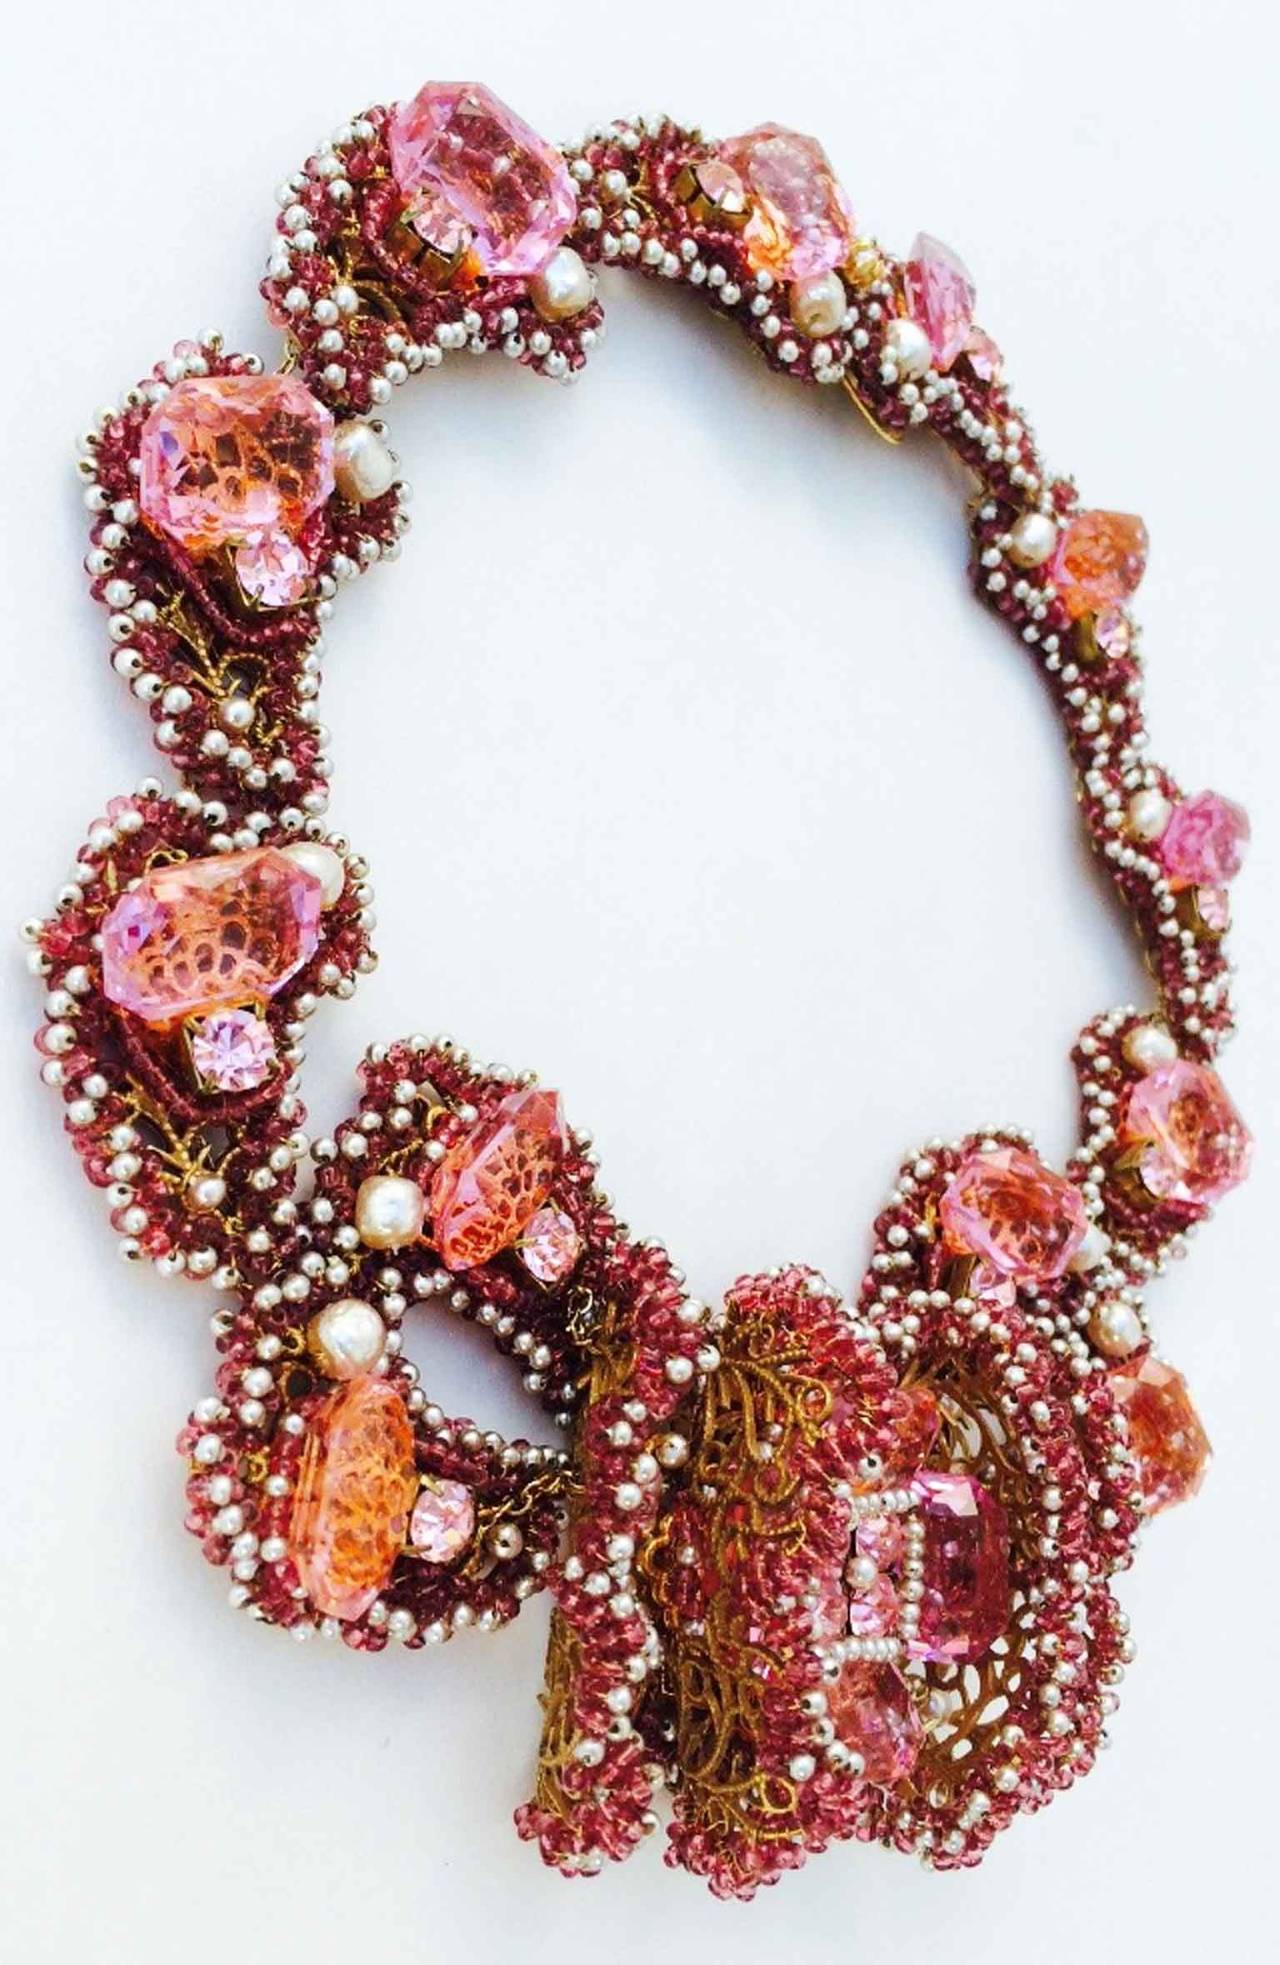 A exquisite vintage William de Lillo couture crystal collar necklace. A special custom one-off commission item for a lady, 1994. Signed gilt metal linked filigree item features emerald cut pink crystal, faux baroque pearls, matching seed beads and